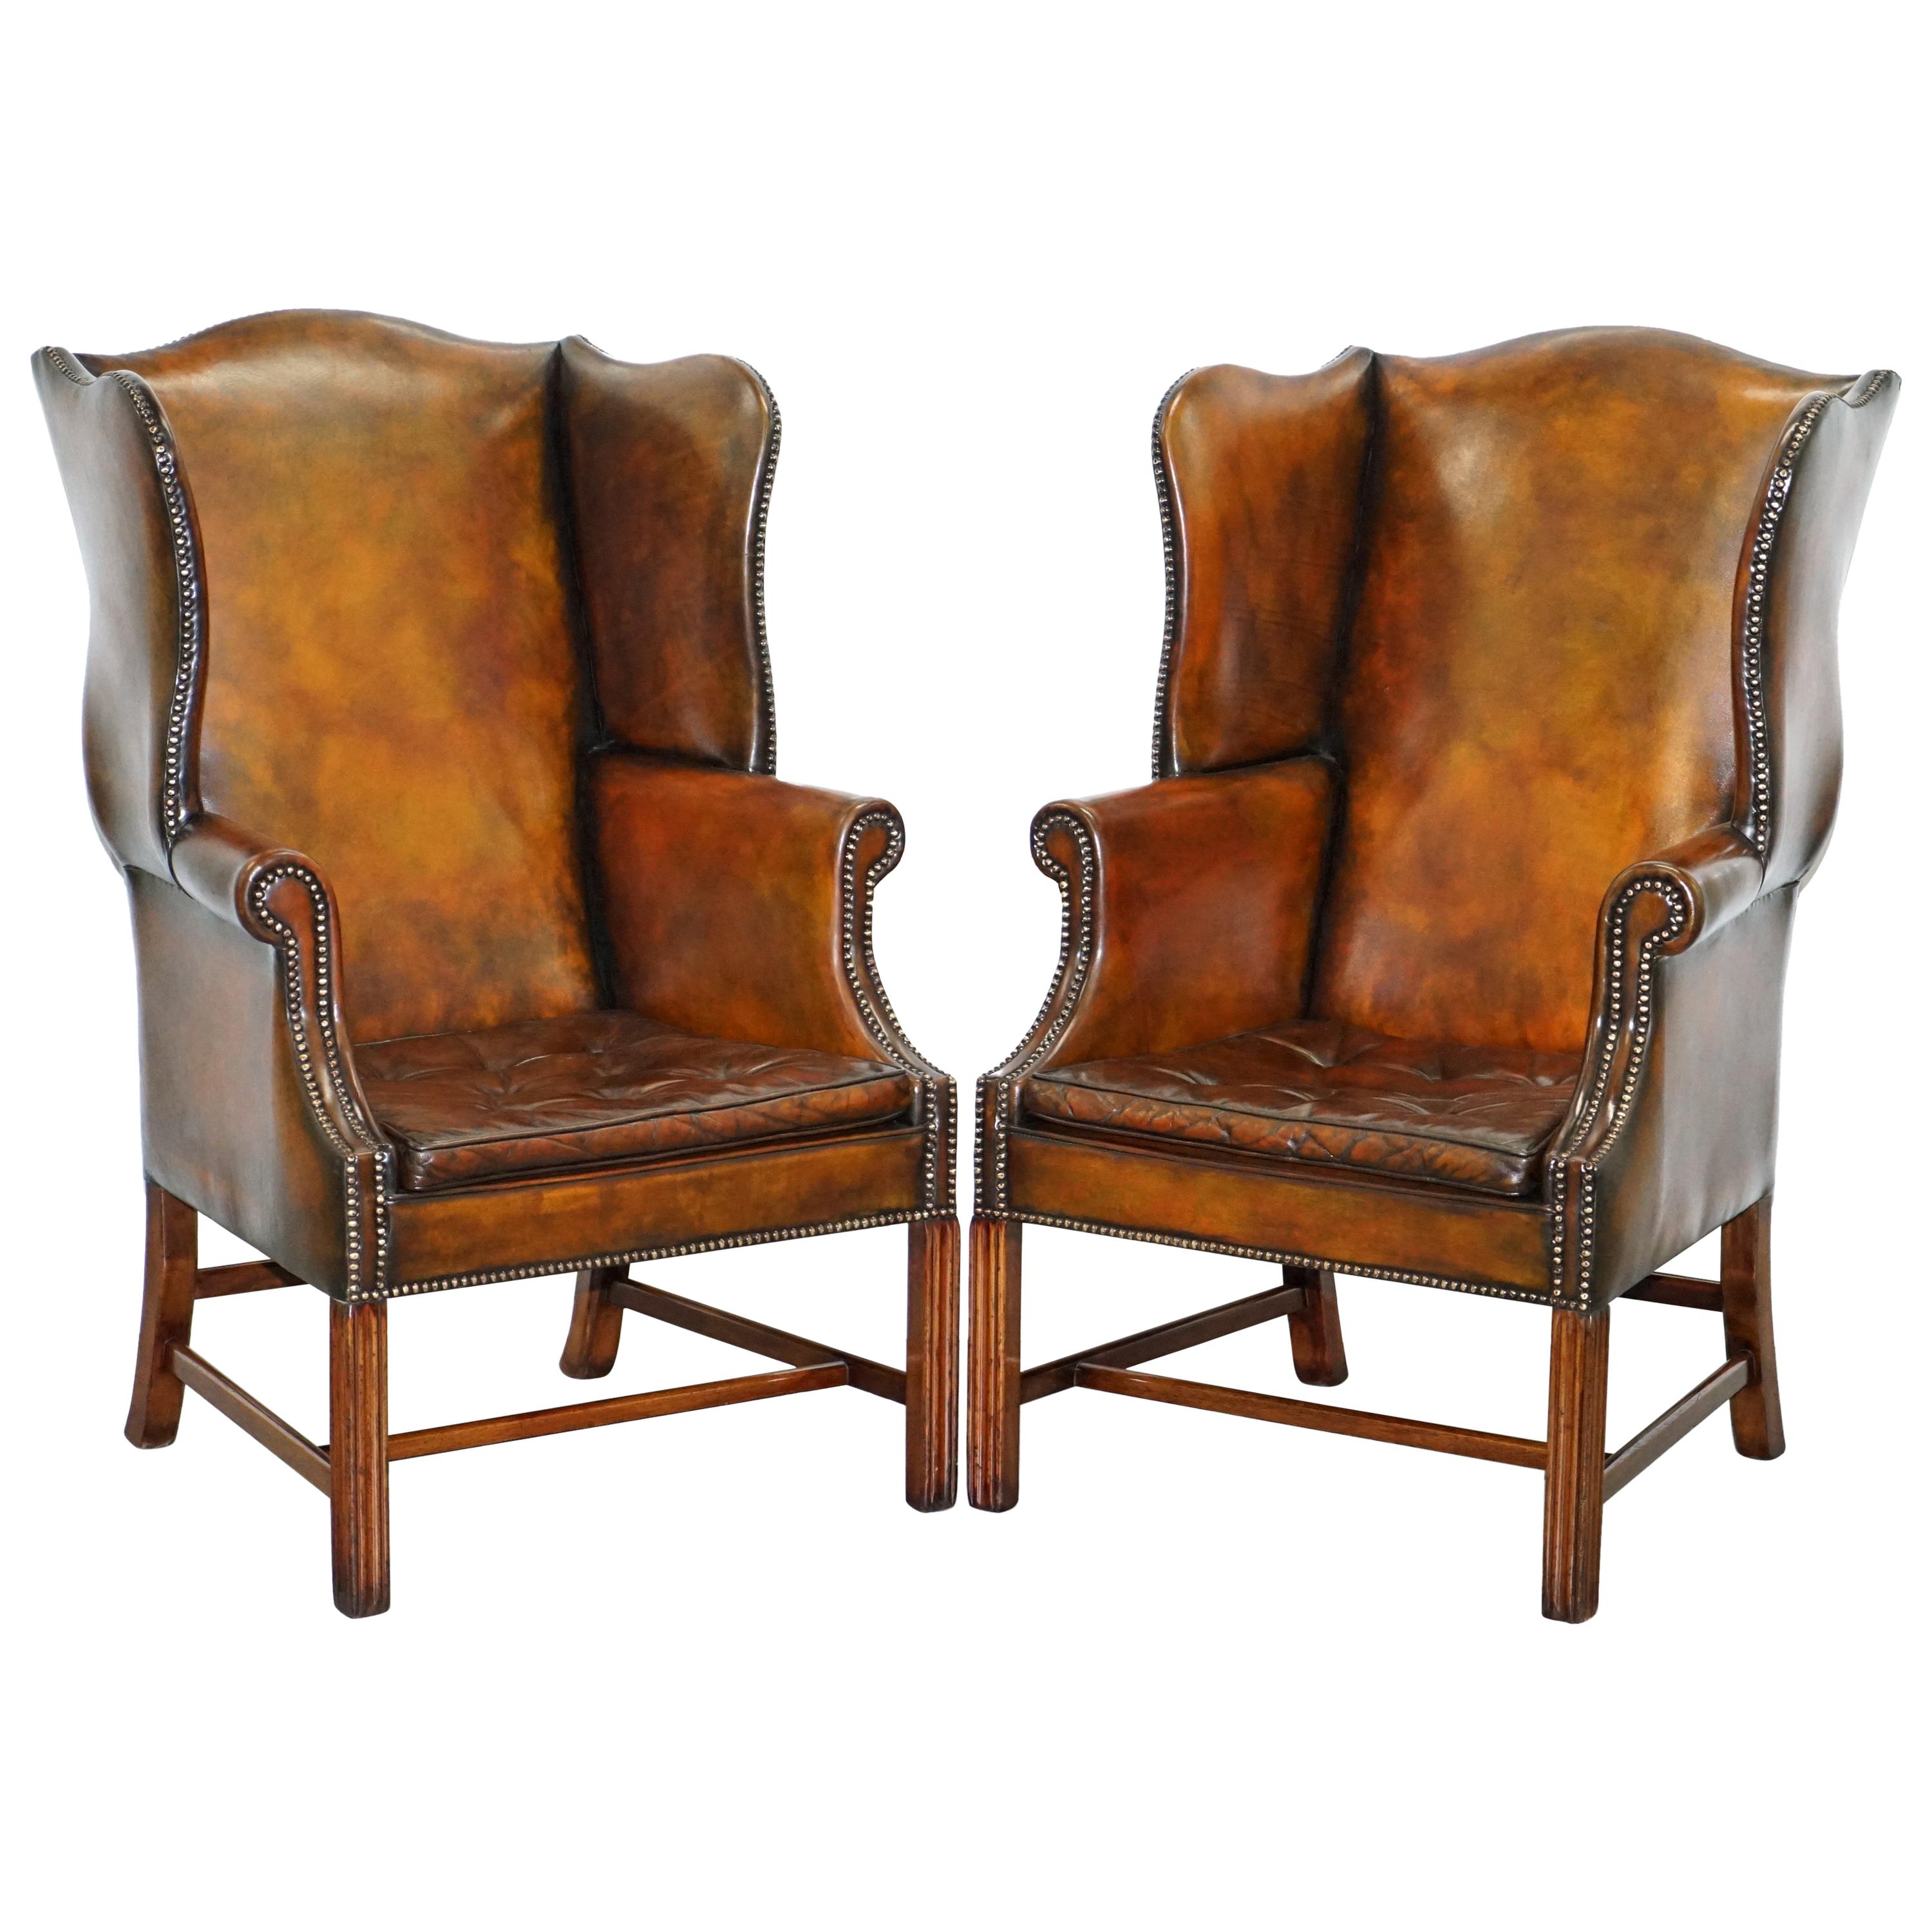 Pair of Georgian, circa 1820 Restored Hand Dyed Brown Leather Wingback Armchairs